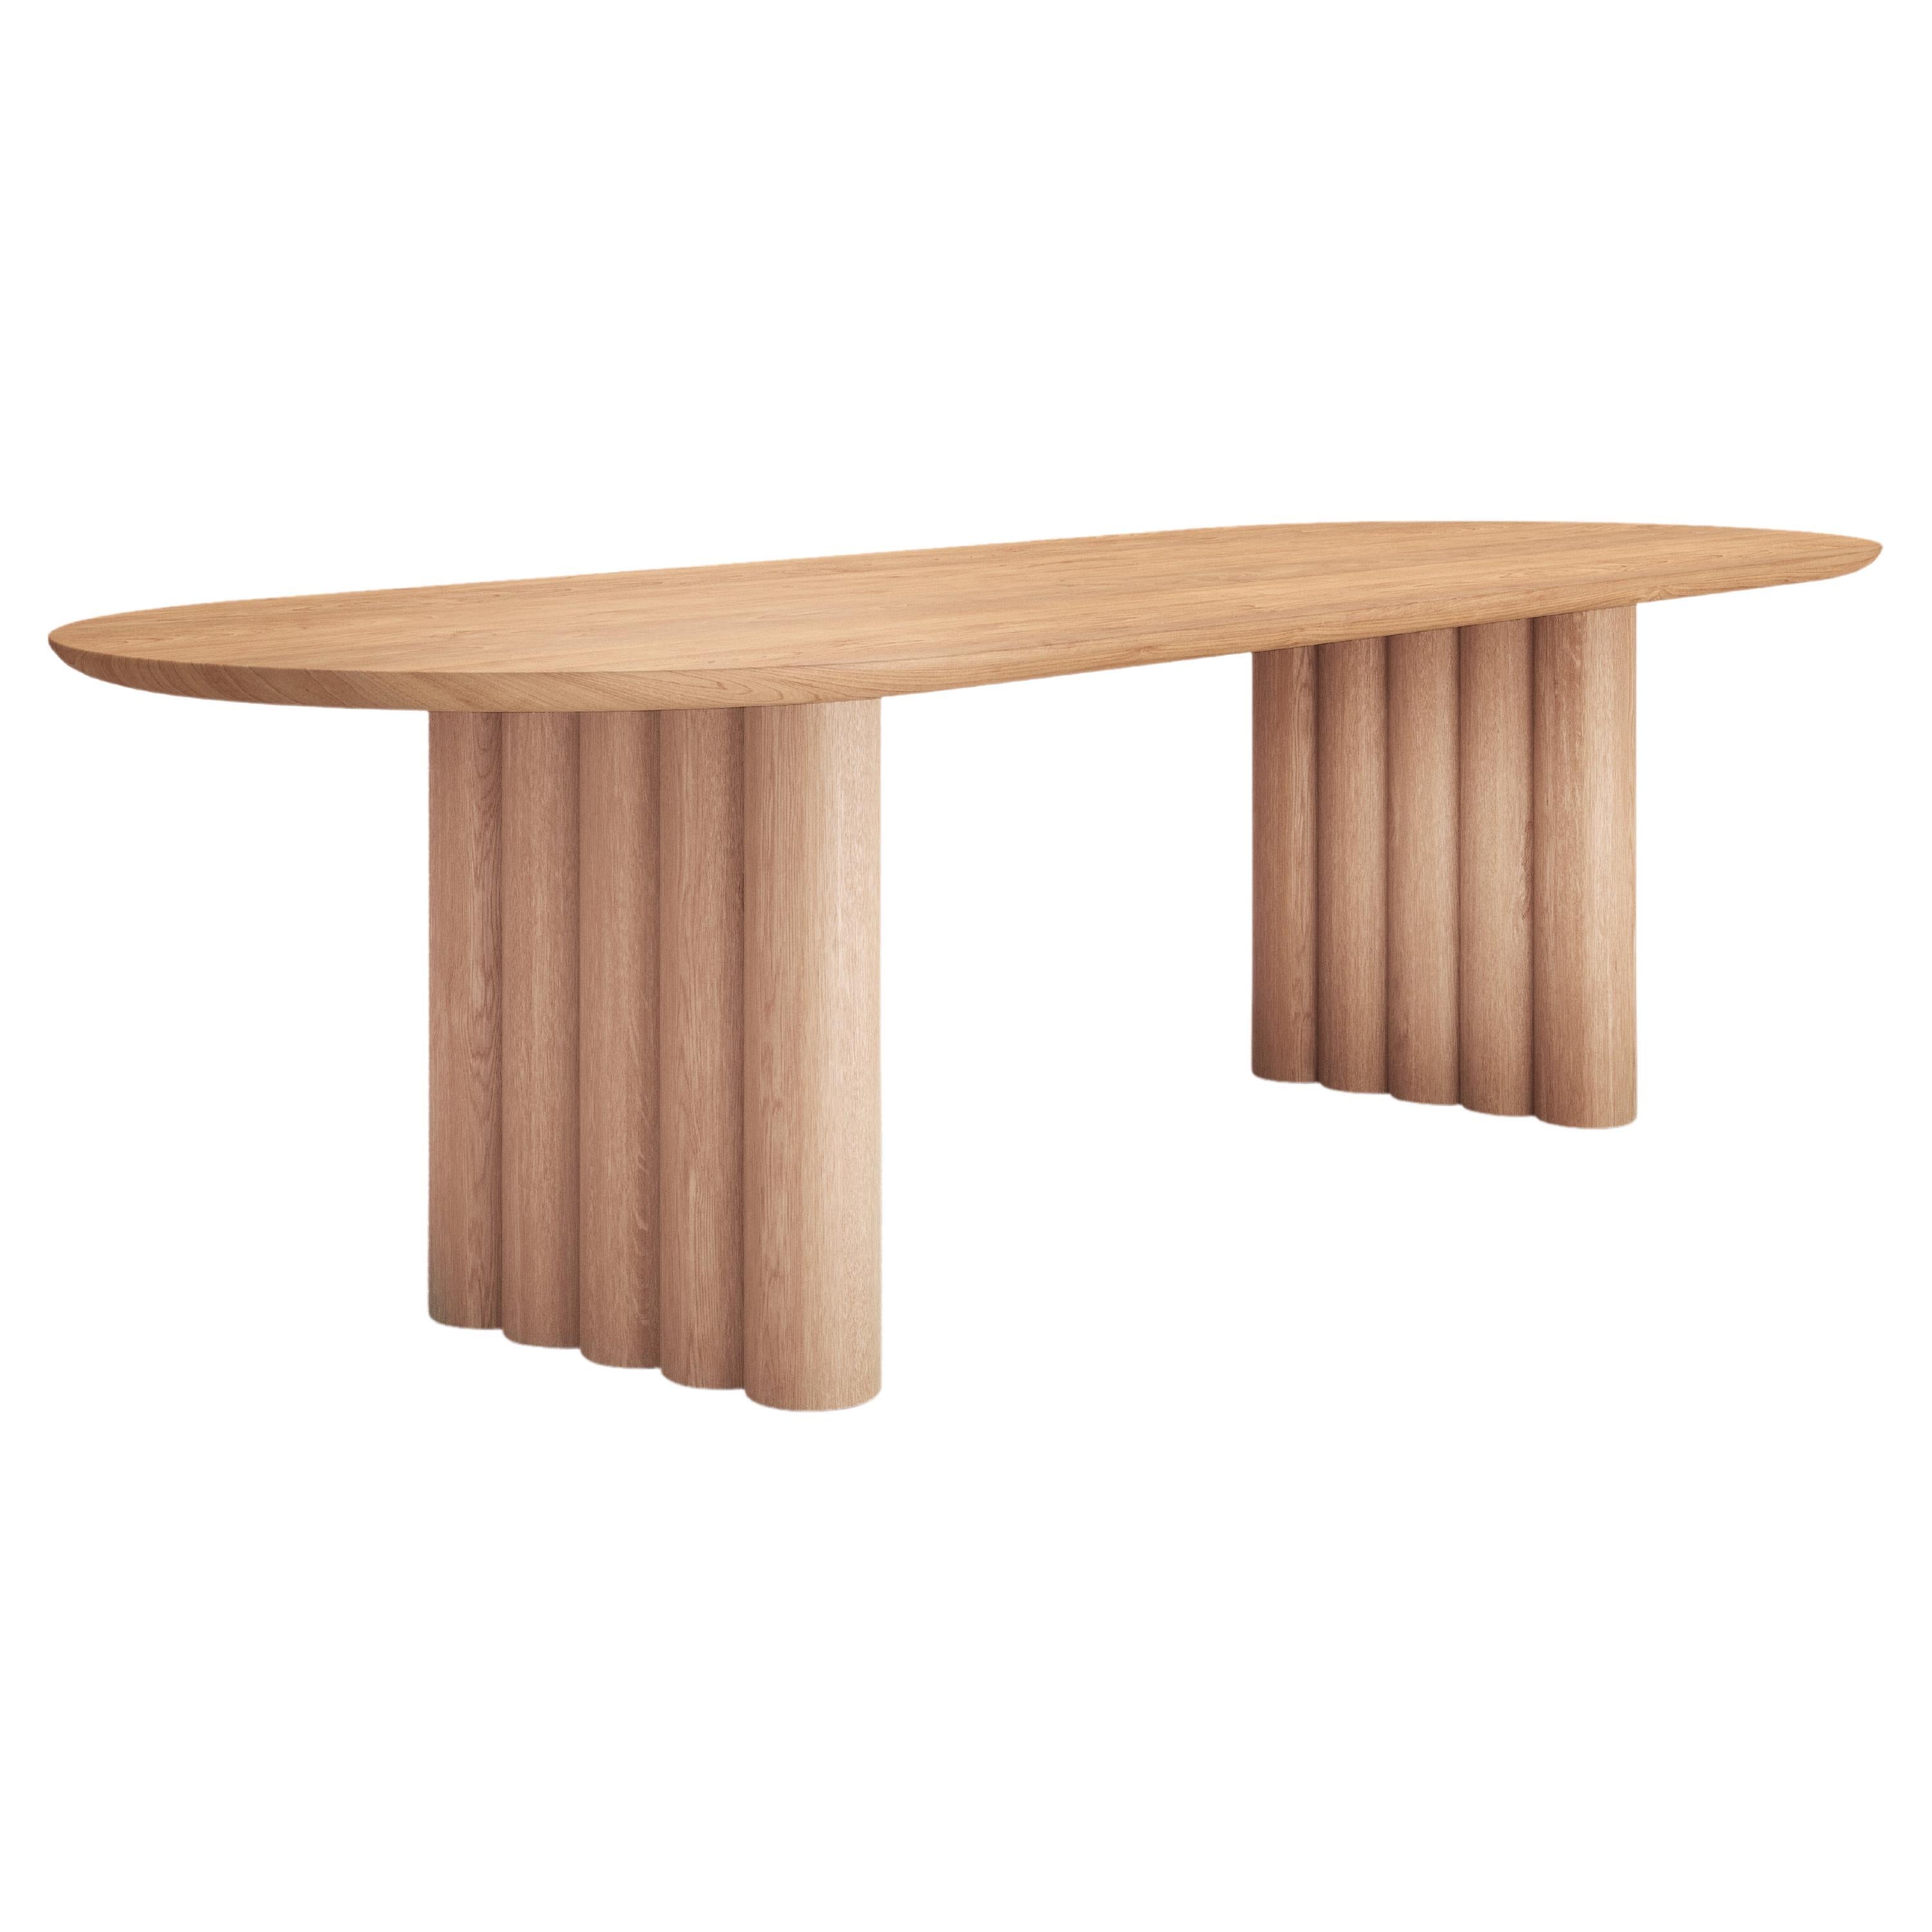 Contemporary Dining Table 'Plush' by Dk3, Light Oak, 200